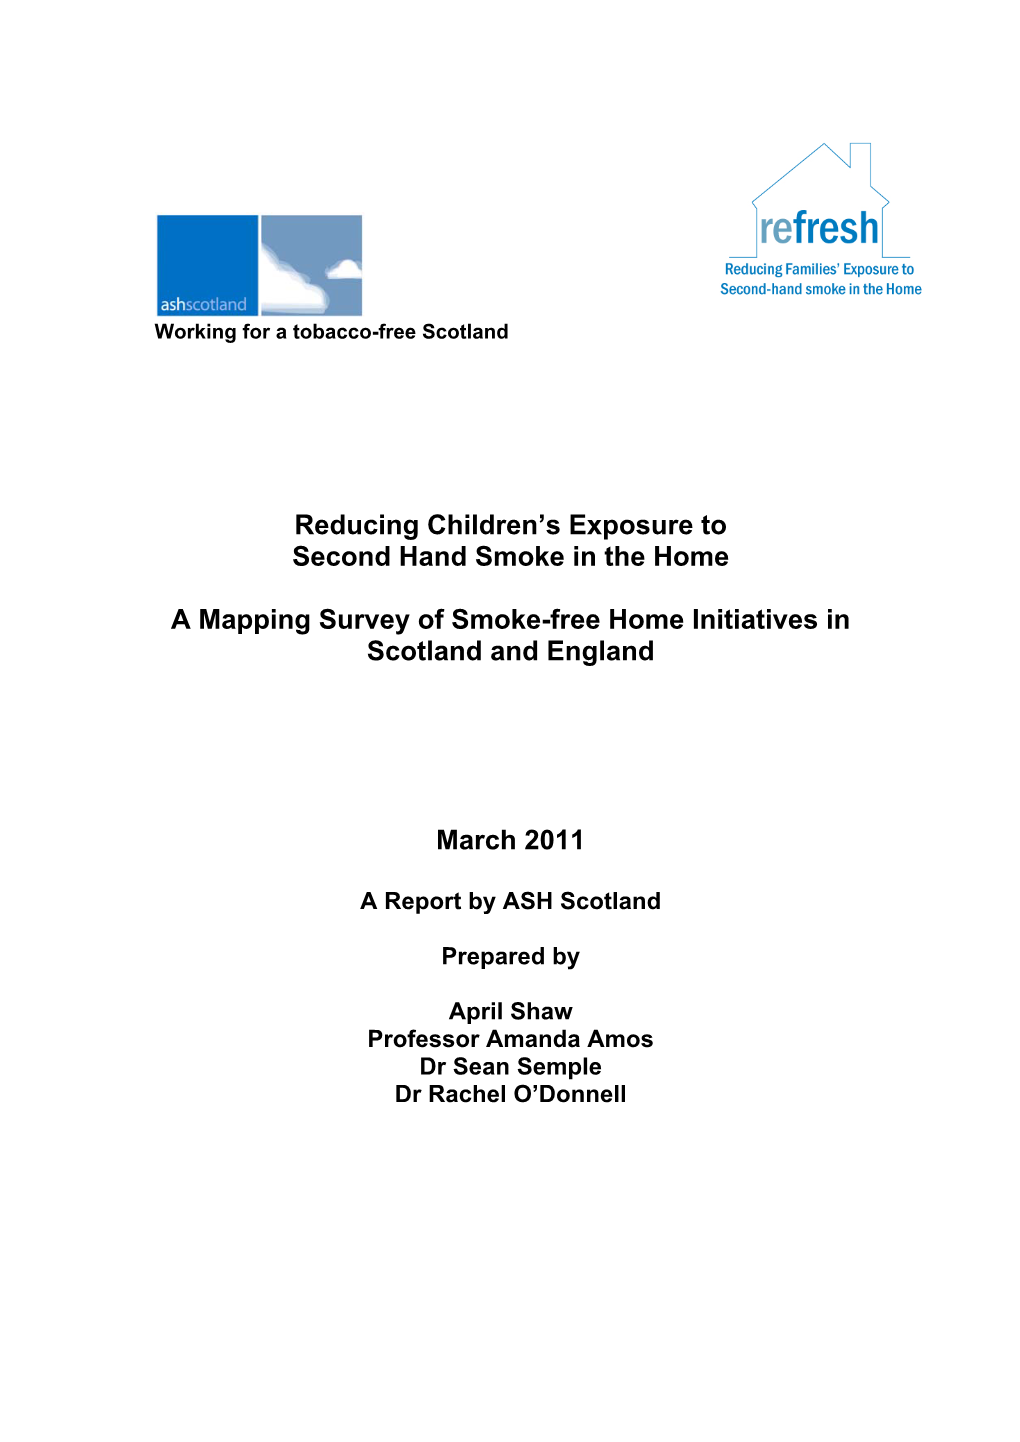 Mapping Survey of Smoke-Free Home Initiatives in Scotland and England